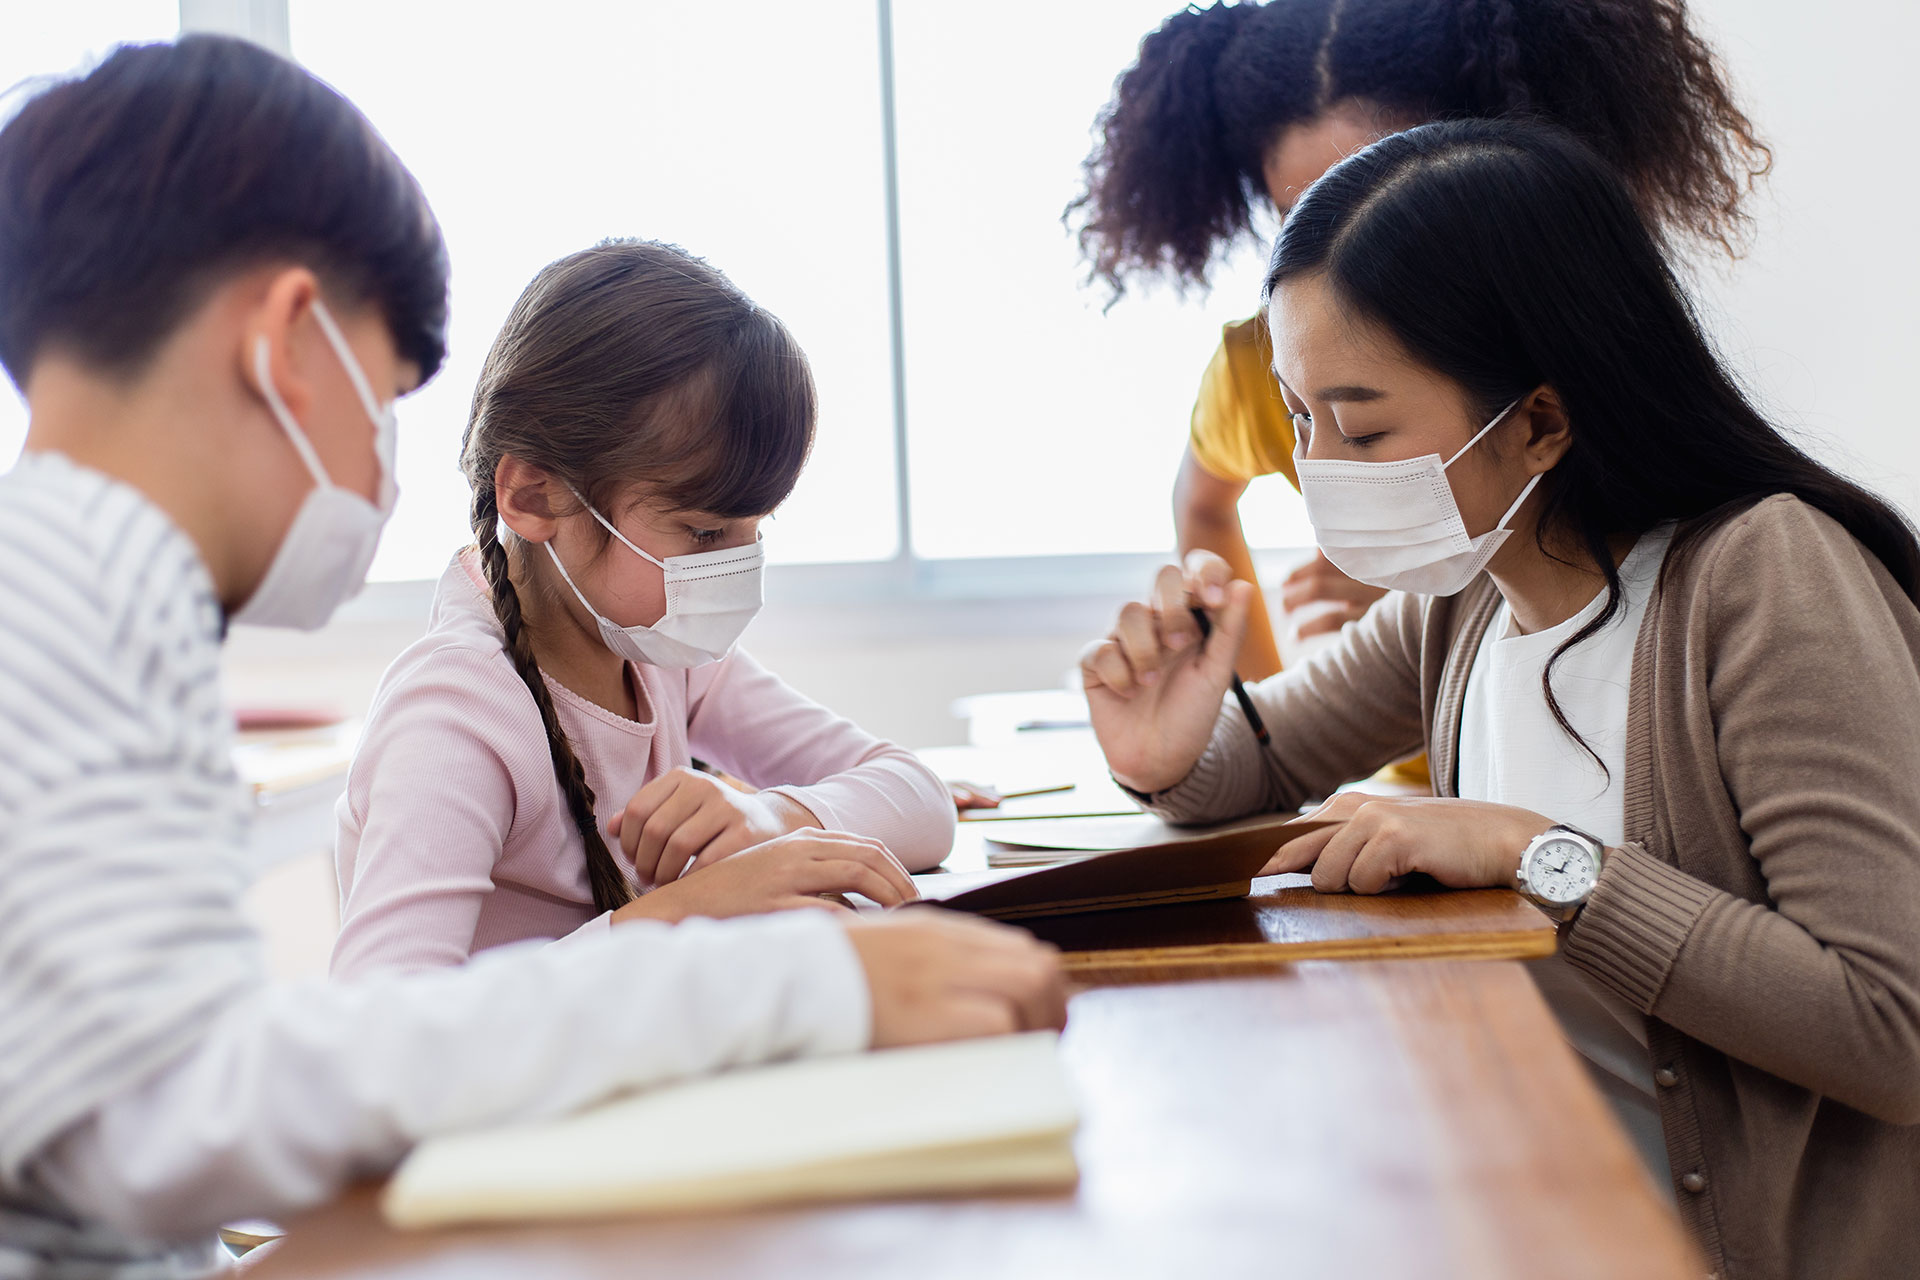 A group of students wearing medical masks in the classroom